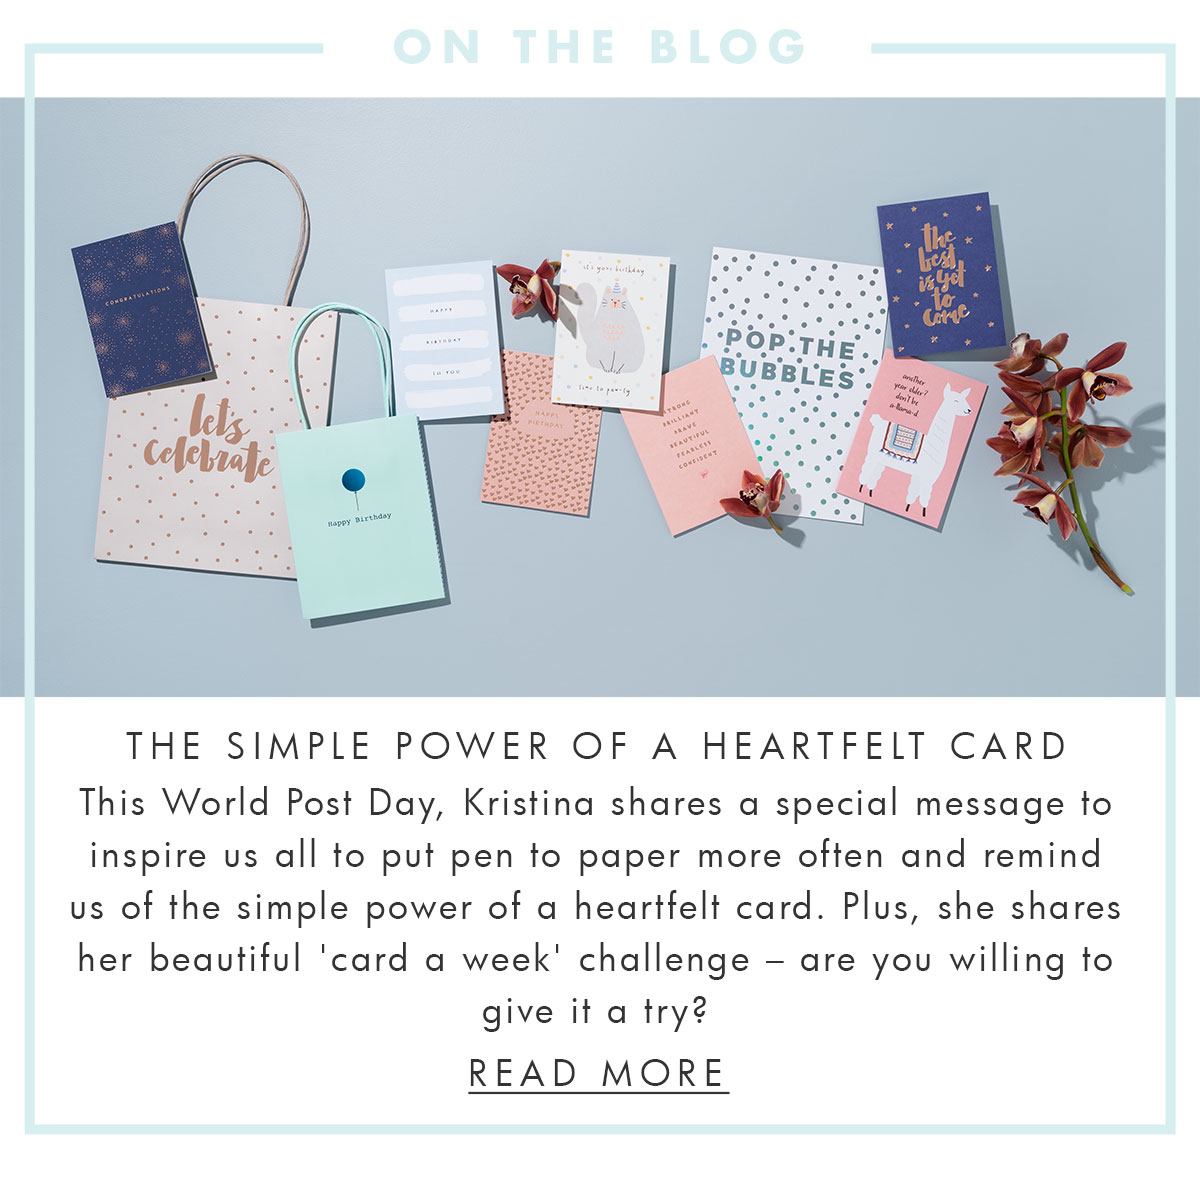 On the blog. The Simple Power of a Heartfelt Card. Read more.